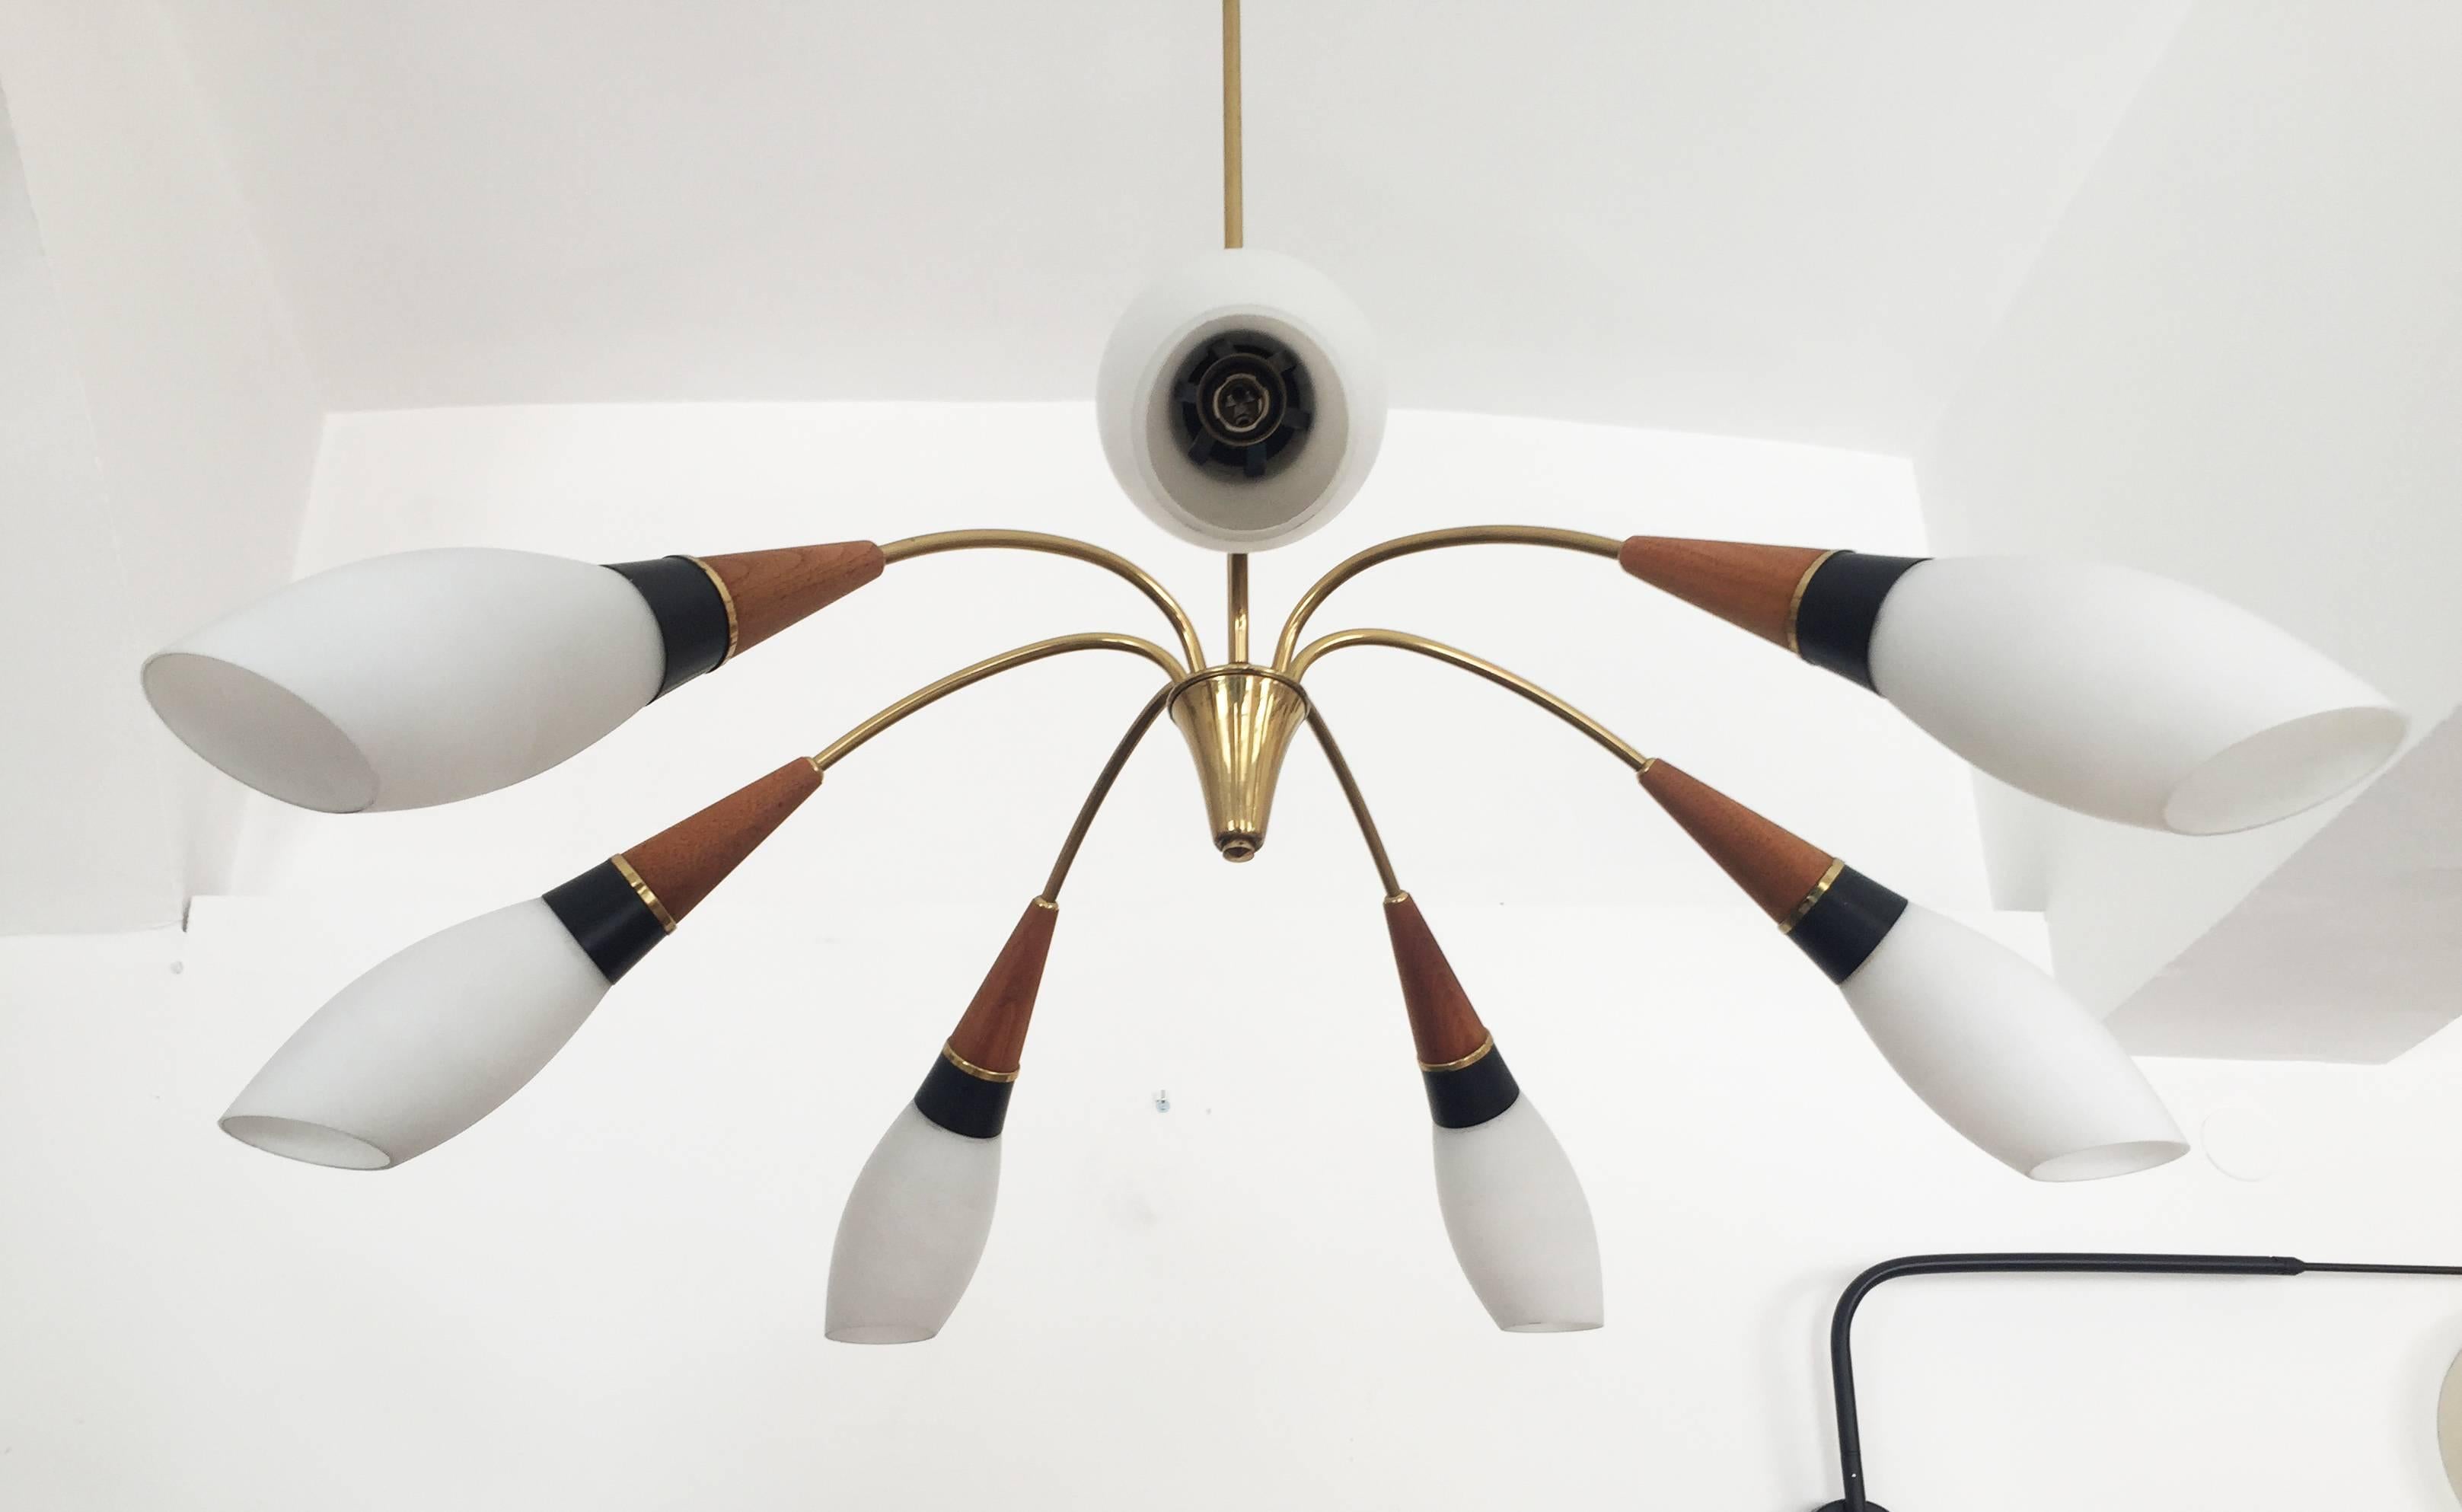 Brass construction with nut wood elements, fitted with E14 sockets, opaline glass shades. Made in Austria, Vienna in the 1960s by Rupert Nikoll.